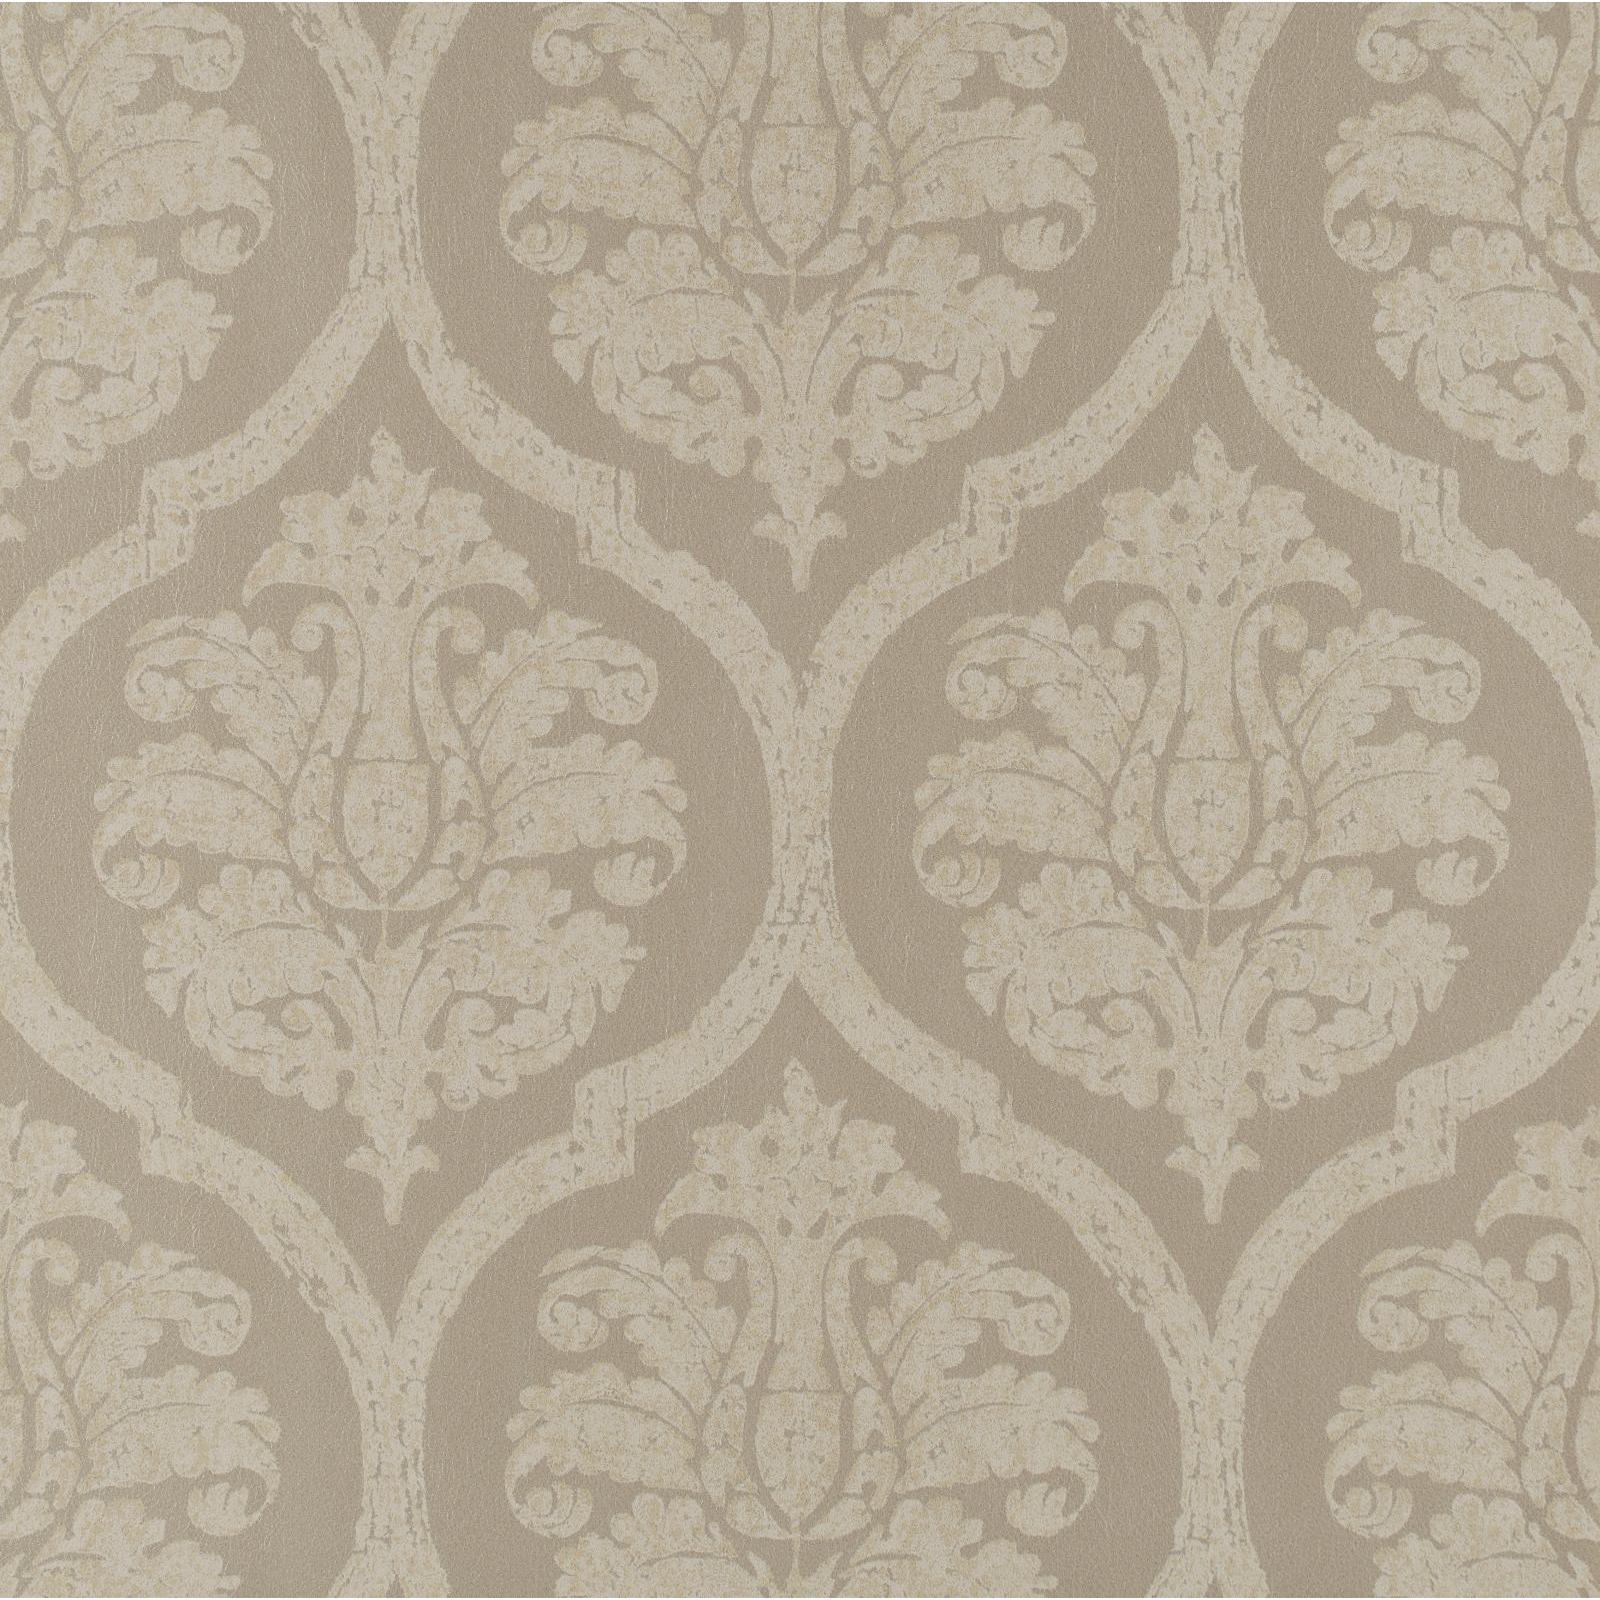 York Wallcoverings Weathered Finishes Leather Damask Wallpaper